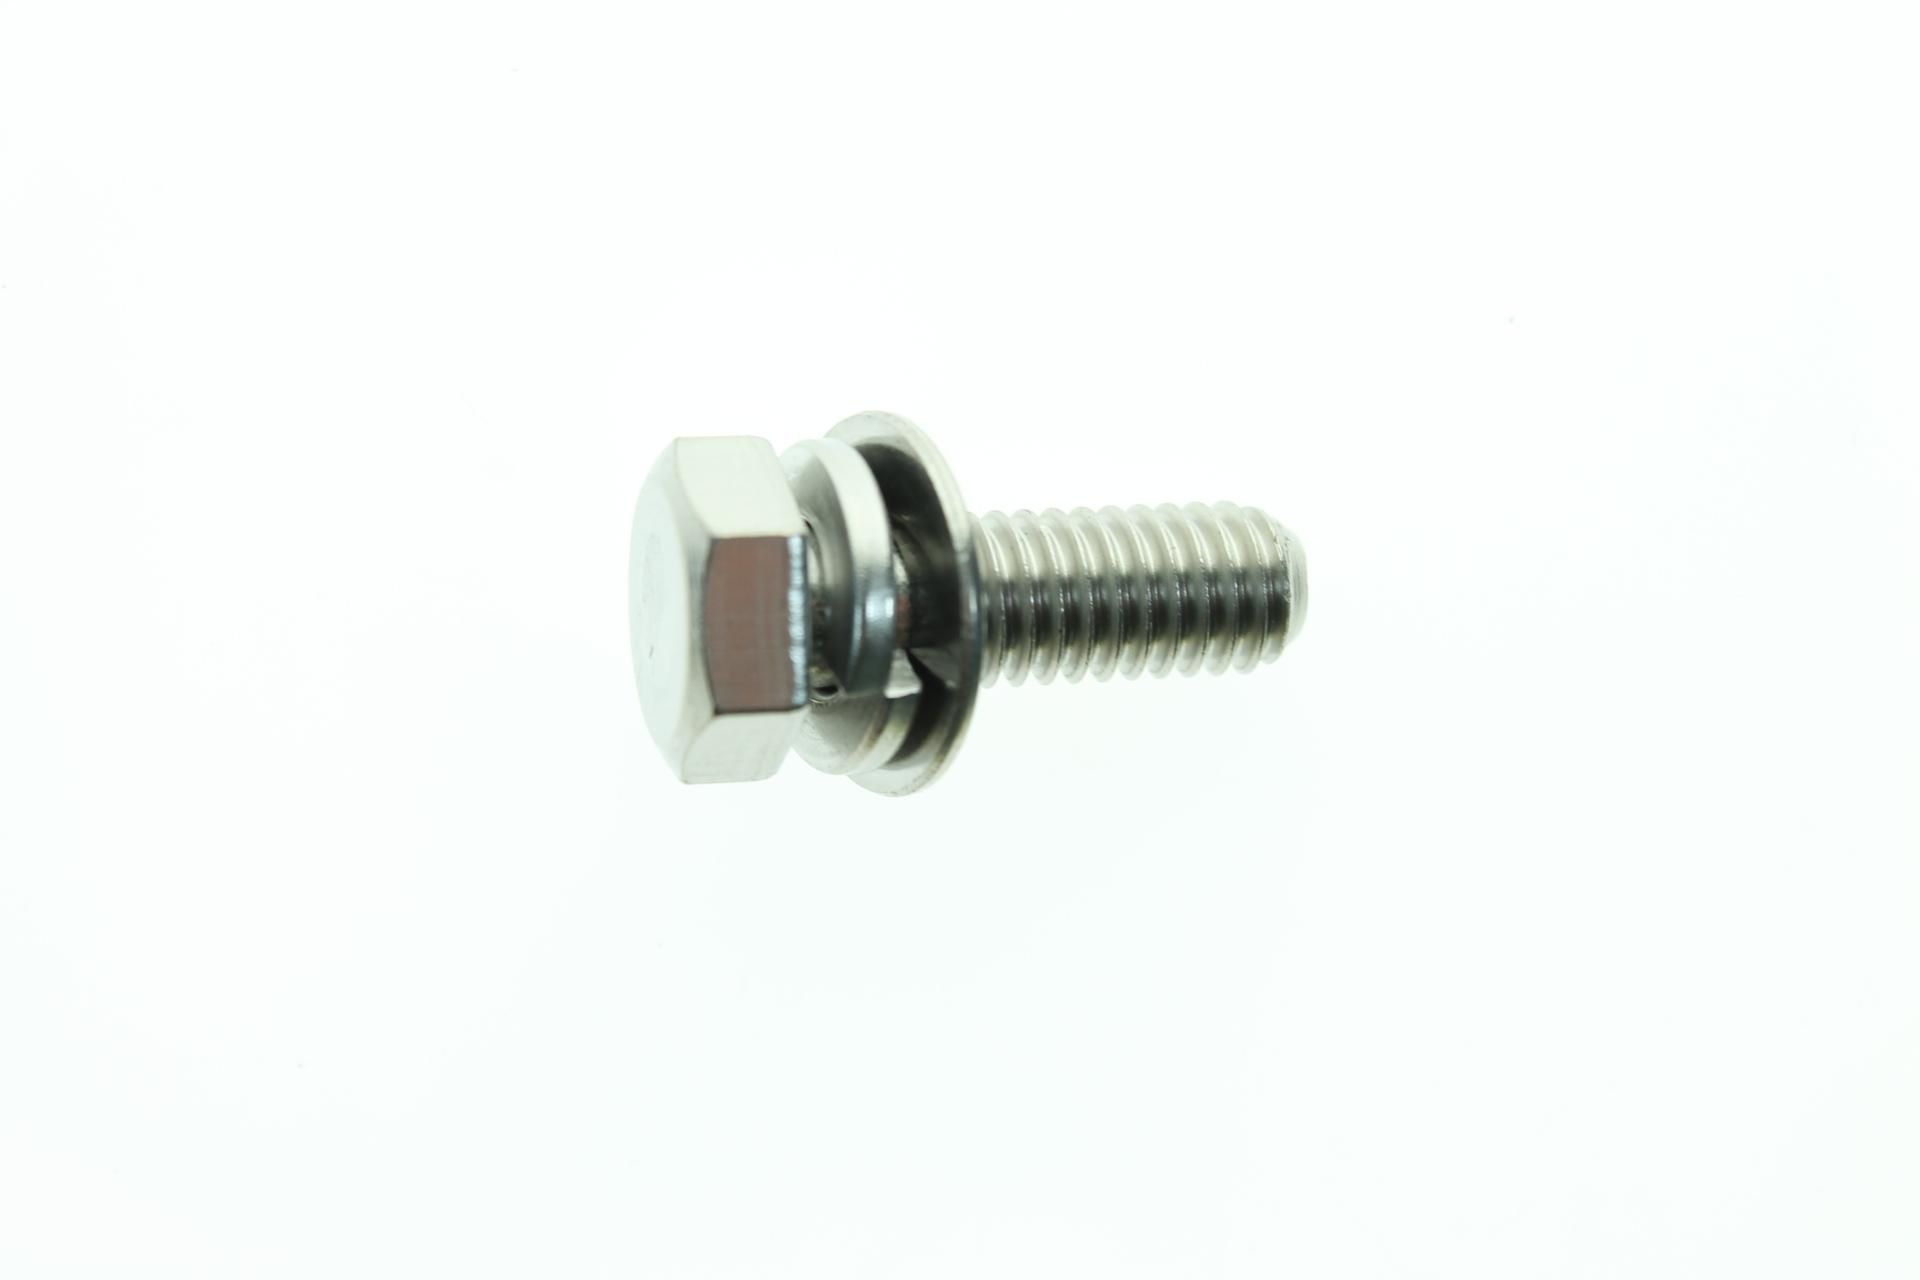 90119-06908-00 BOLT, WITH WASHER